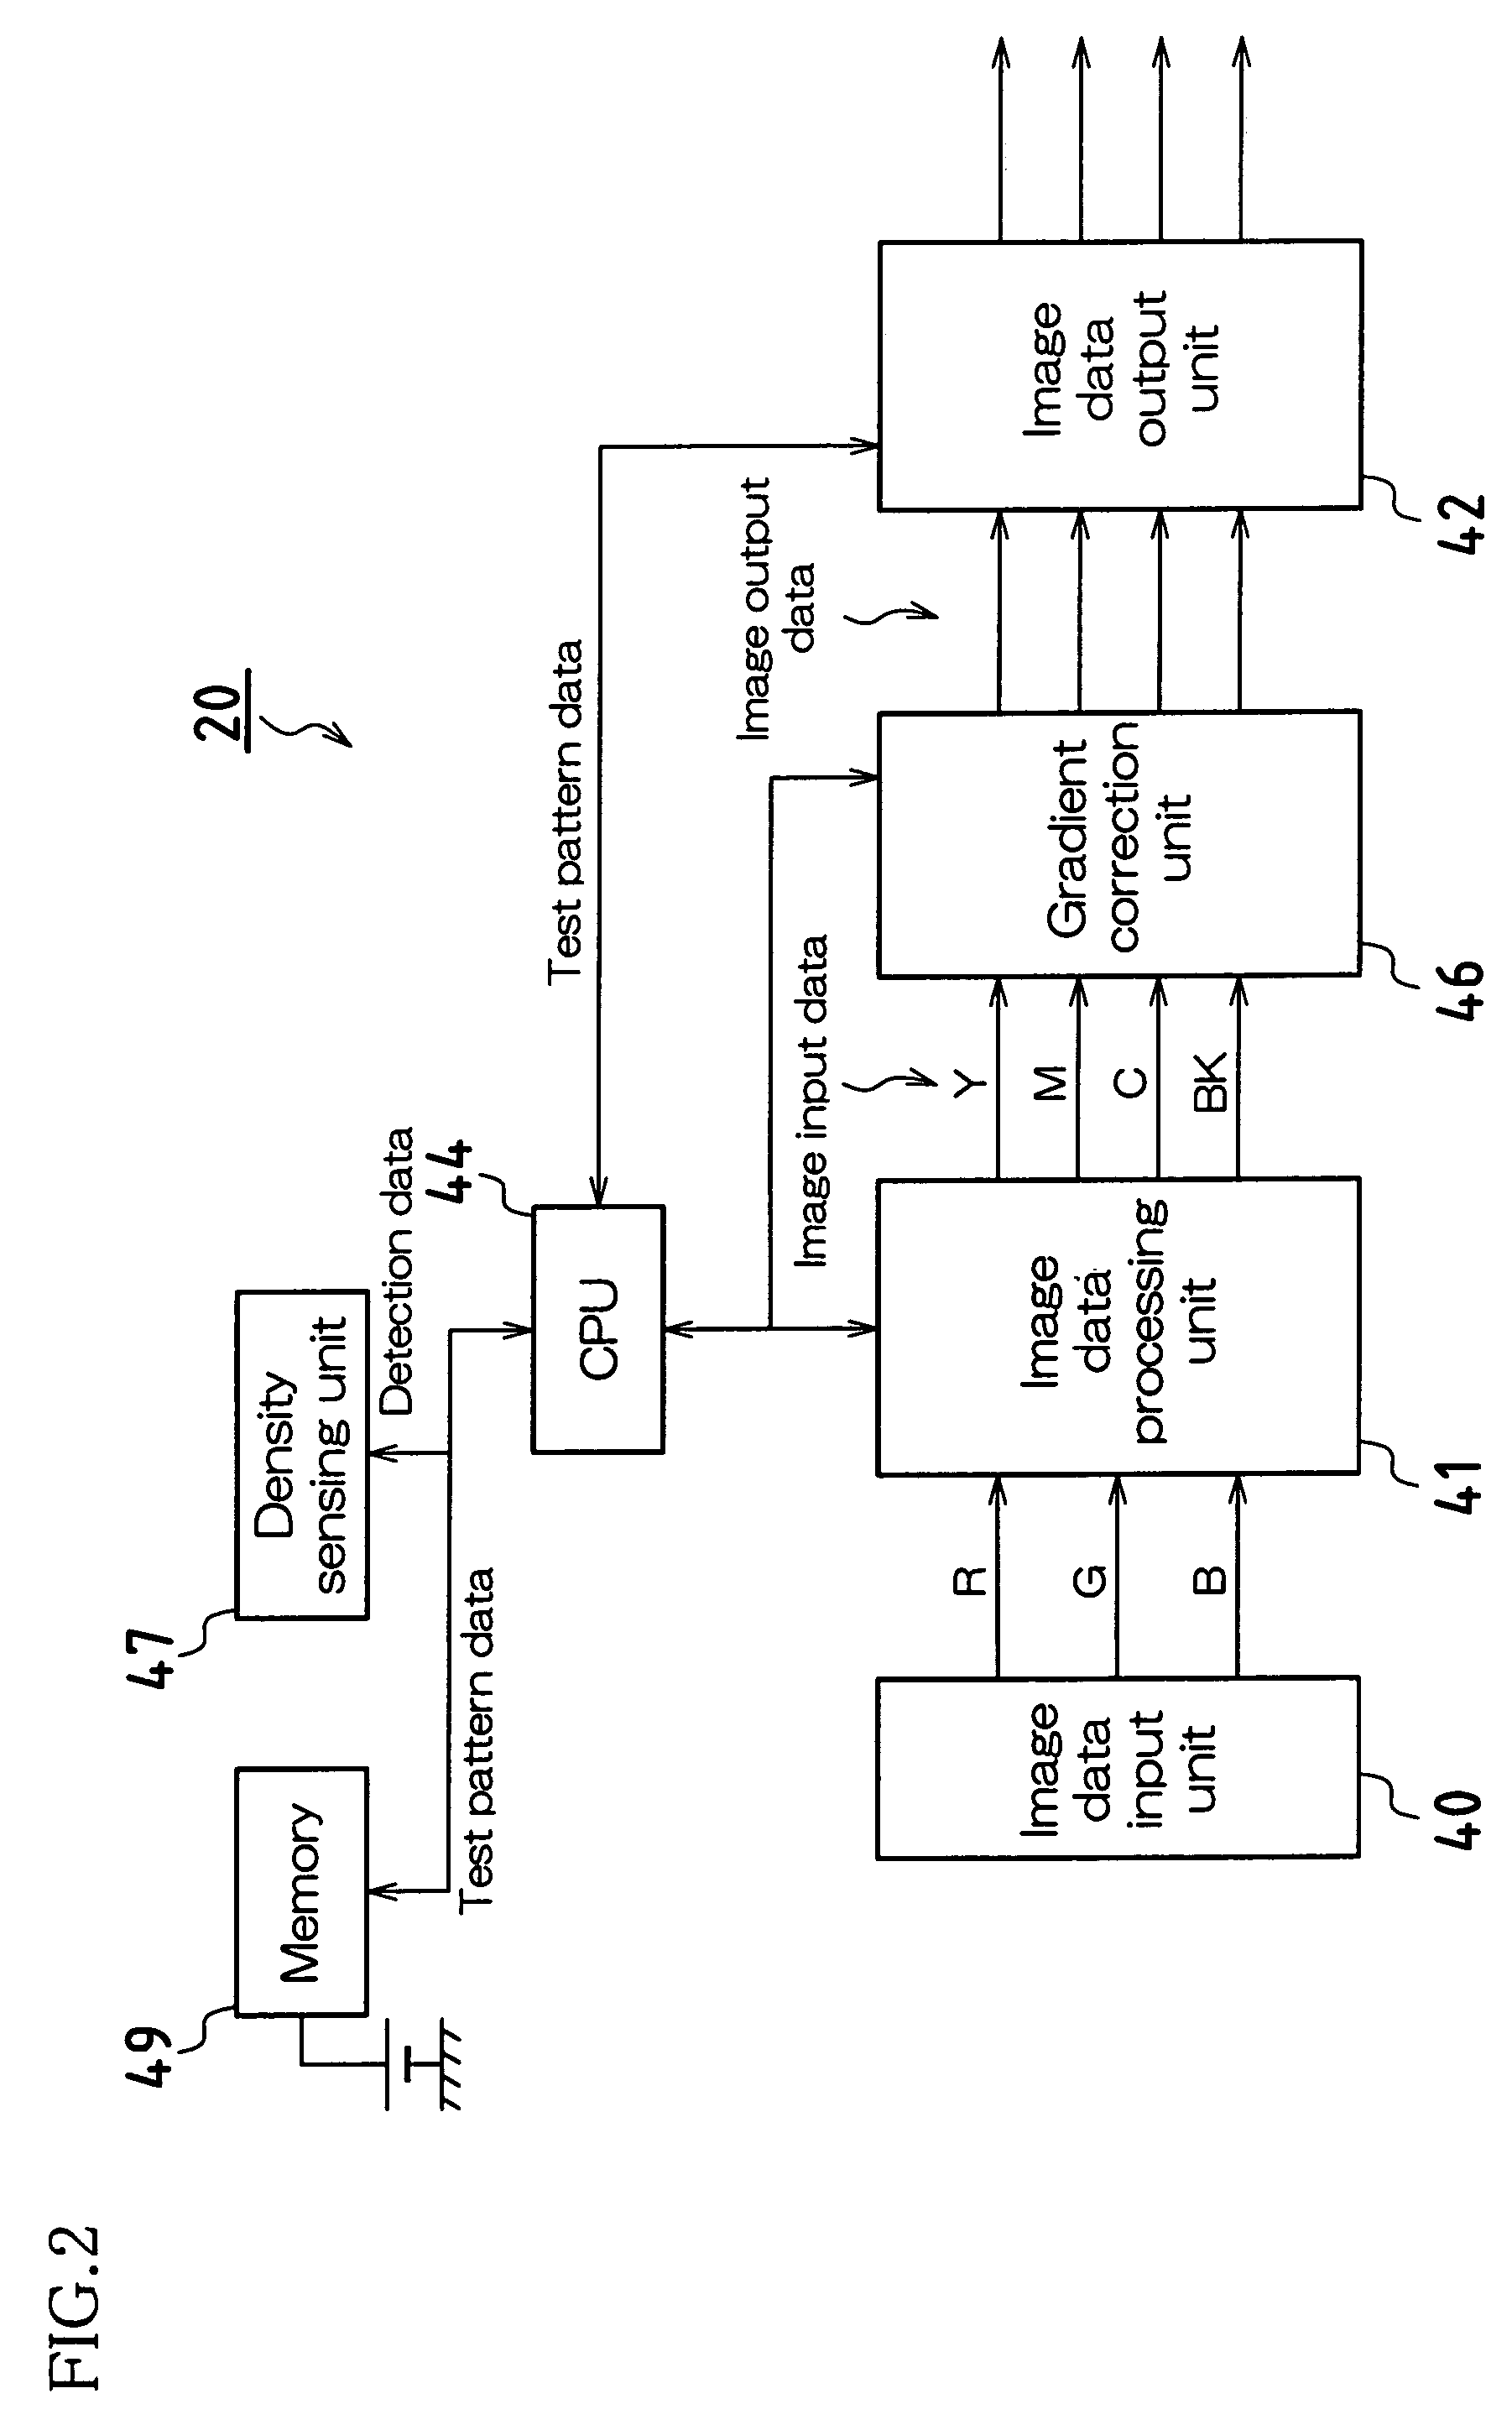 Image correction method and image forming apparatus